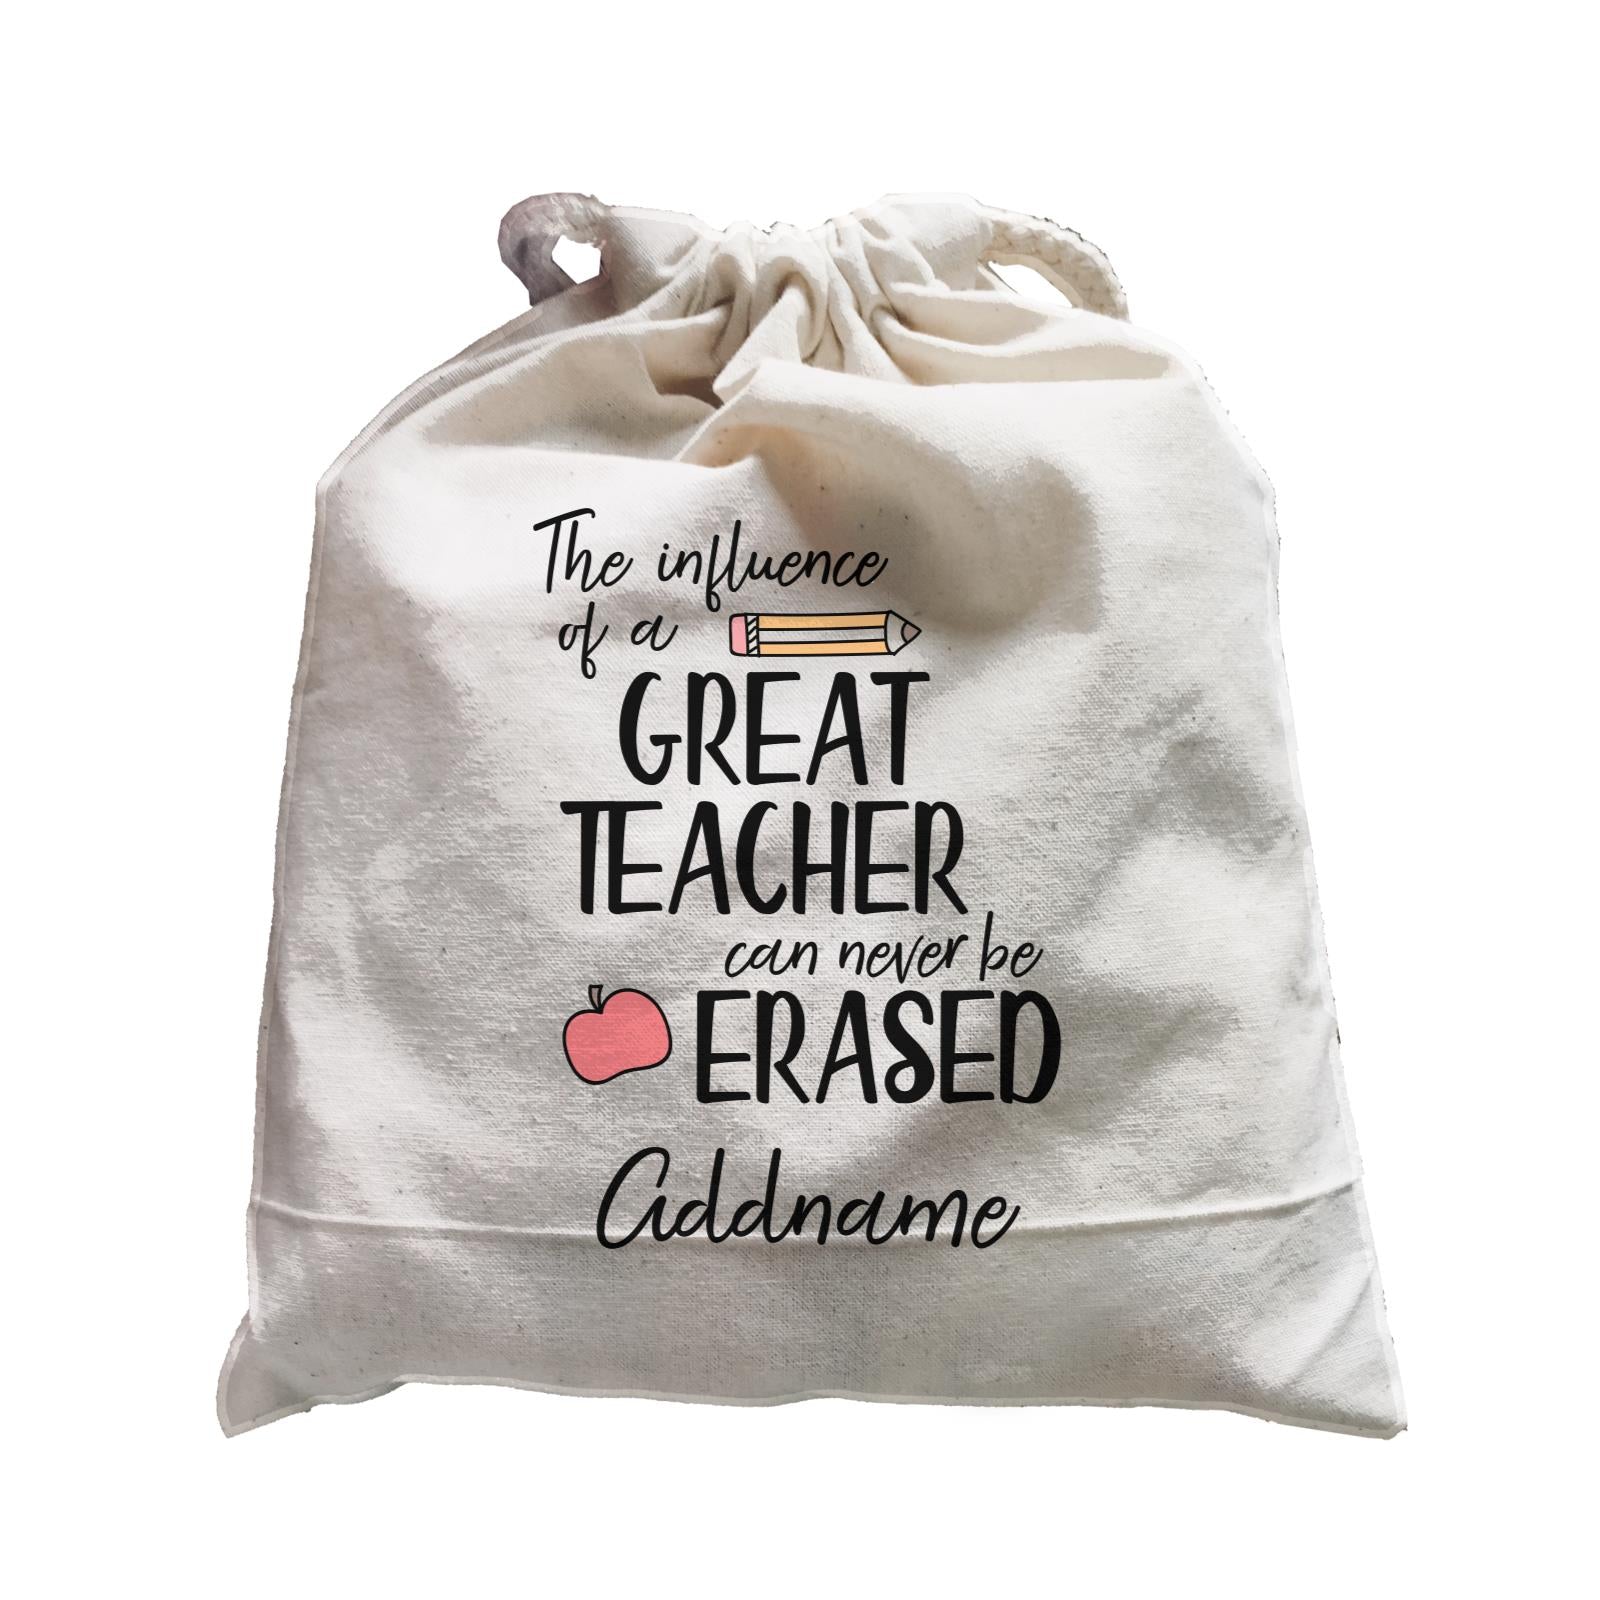 Teacher Quotes The Influence Of A Great Teacher Can Never Be Erased Addname Satchel